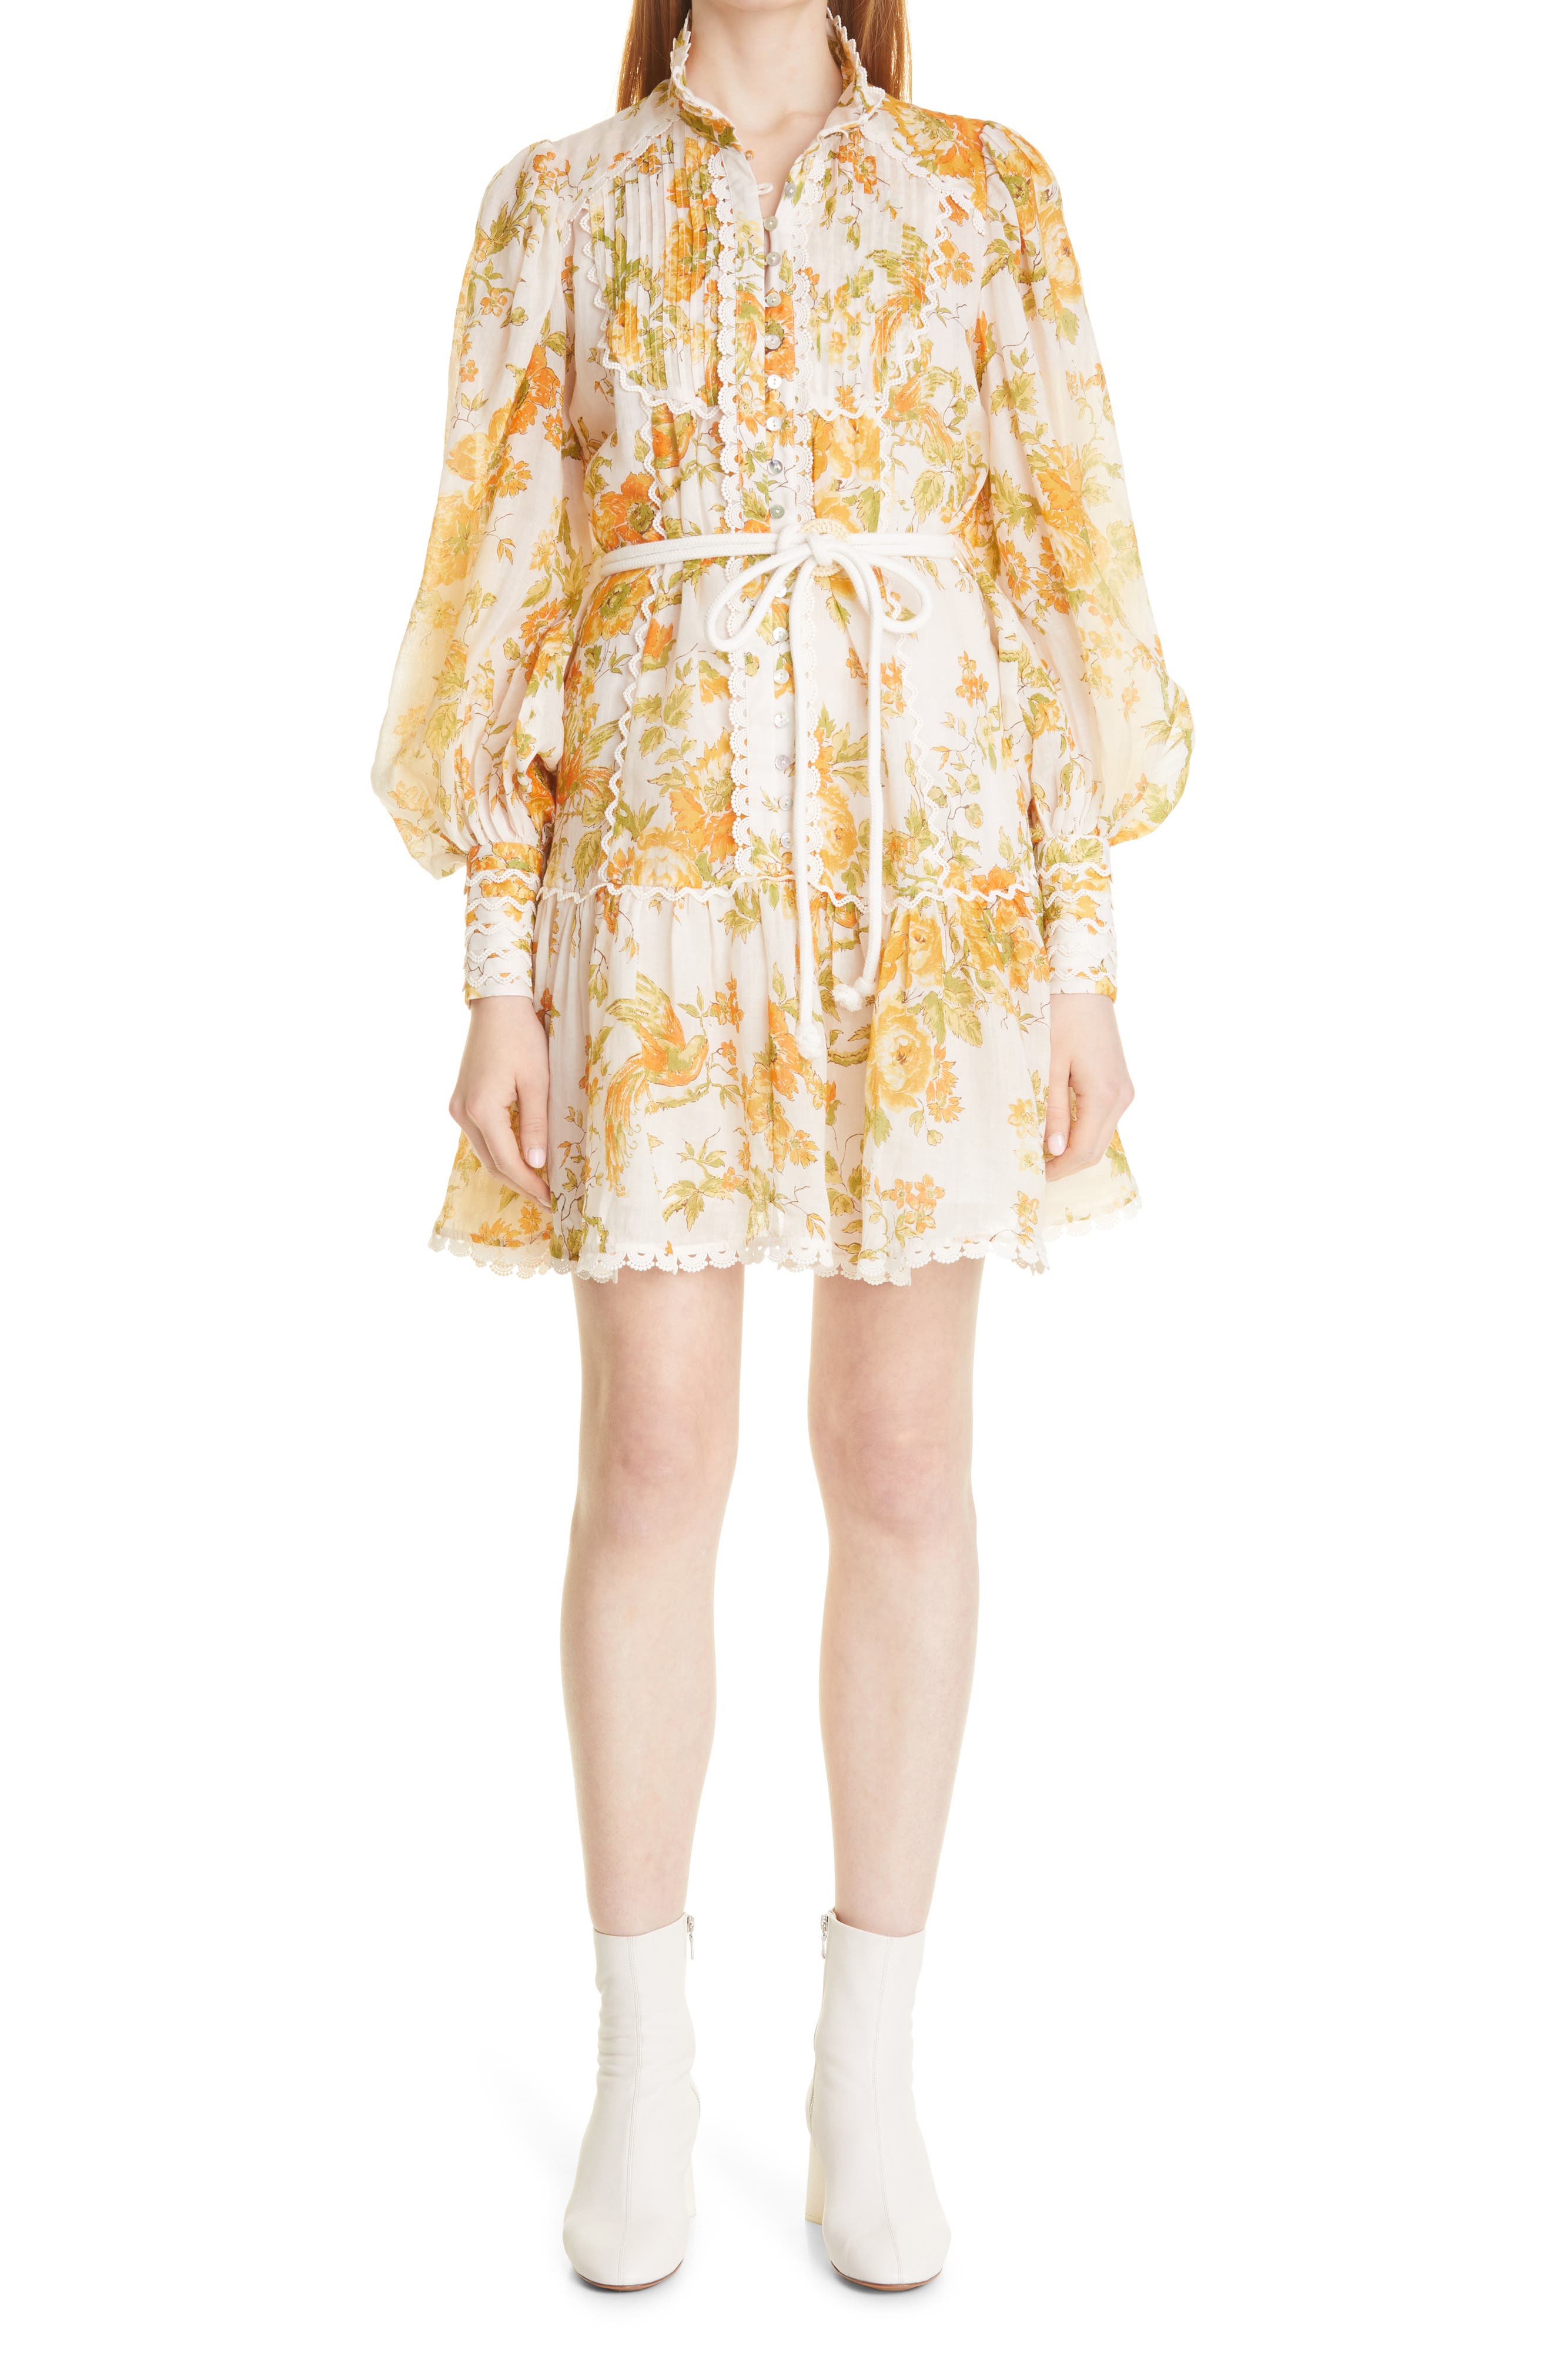 ALEMAIS Songbird Floral Print Ruffle Minidress in Citrus at Nordstrom, Size 4 Us